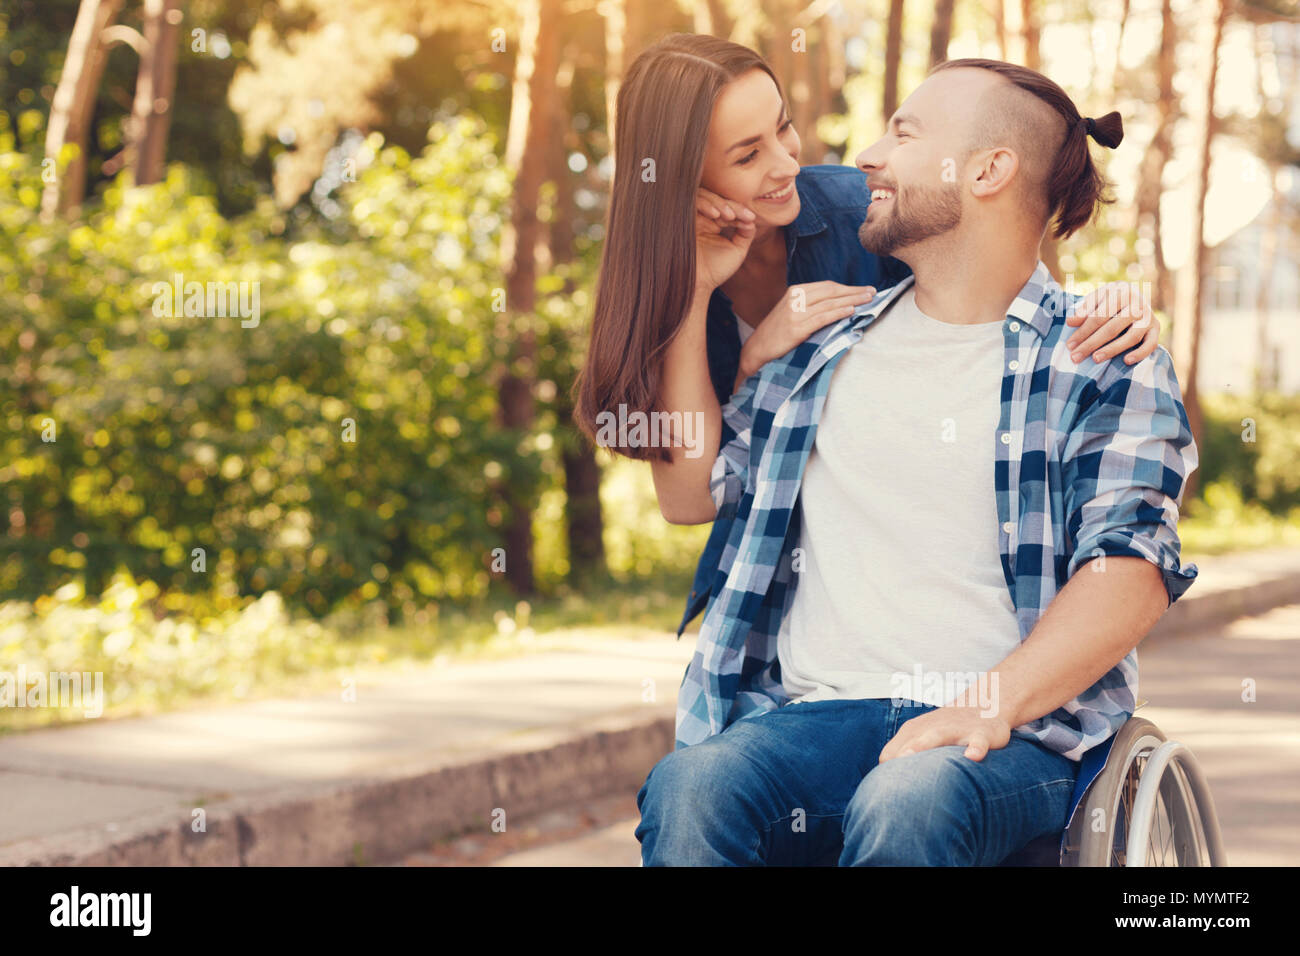 Cheerful disabled man looking at his girlfriend Stock Photo